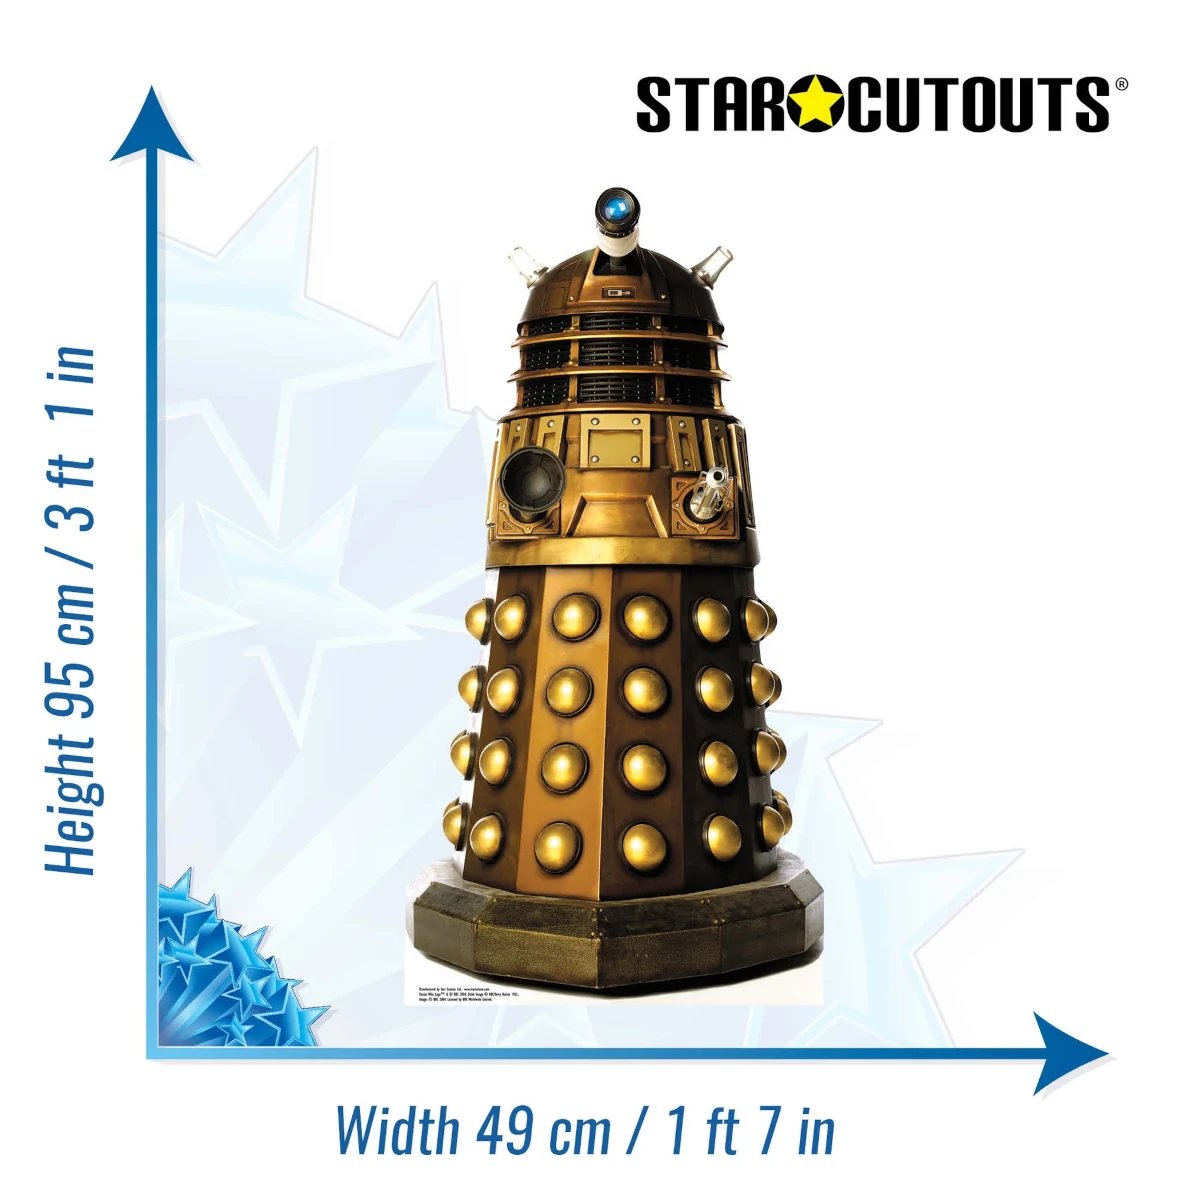 SC916 Gold Dalek Caan (Doctor Who) Official Mini Cardboard Cutout Standee Size